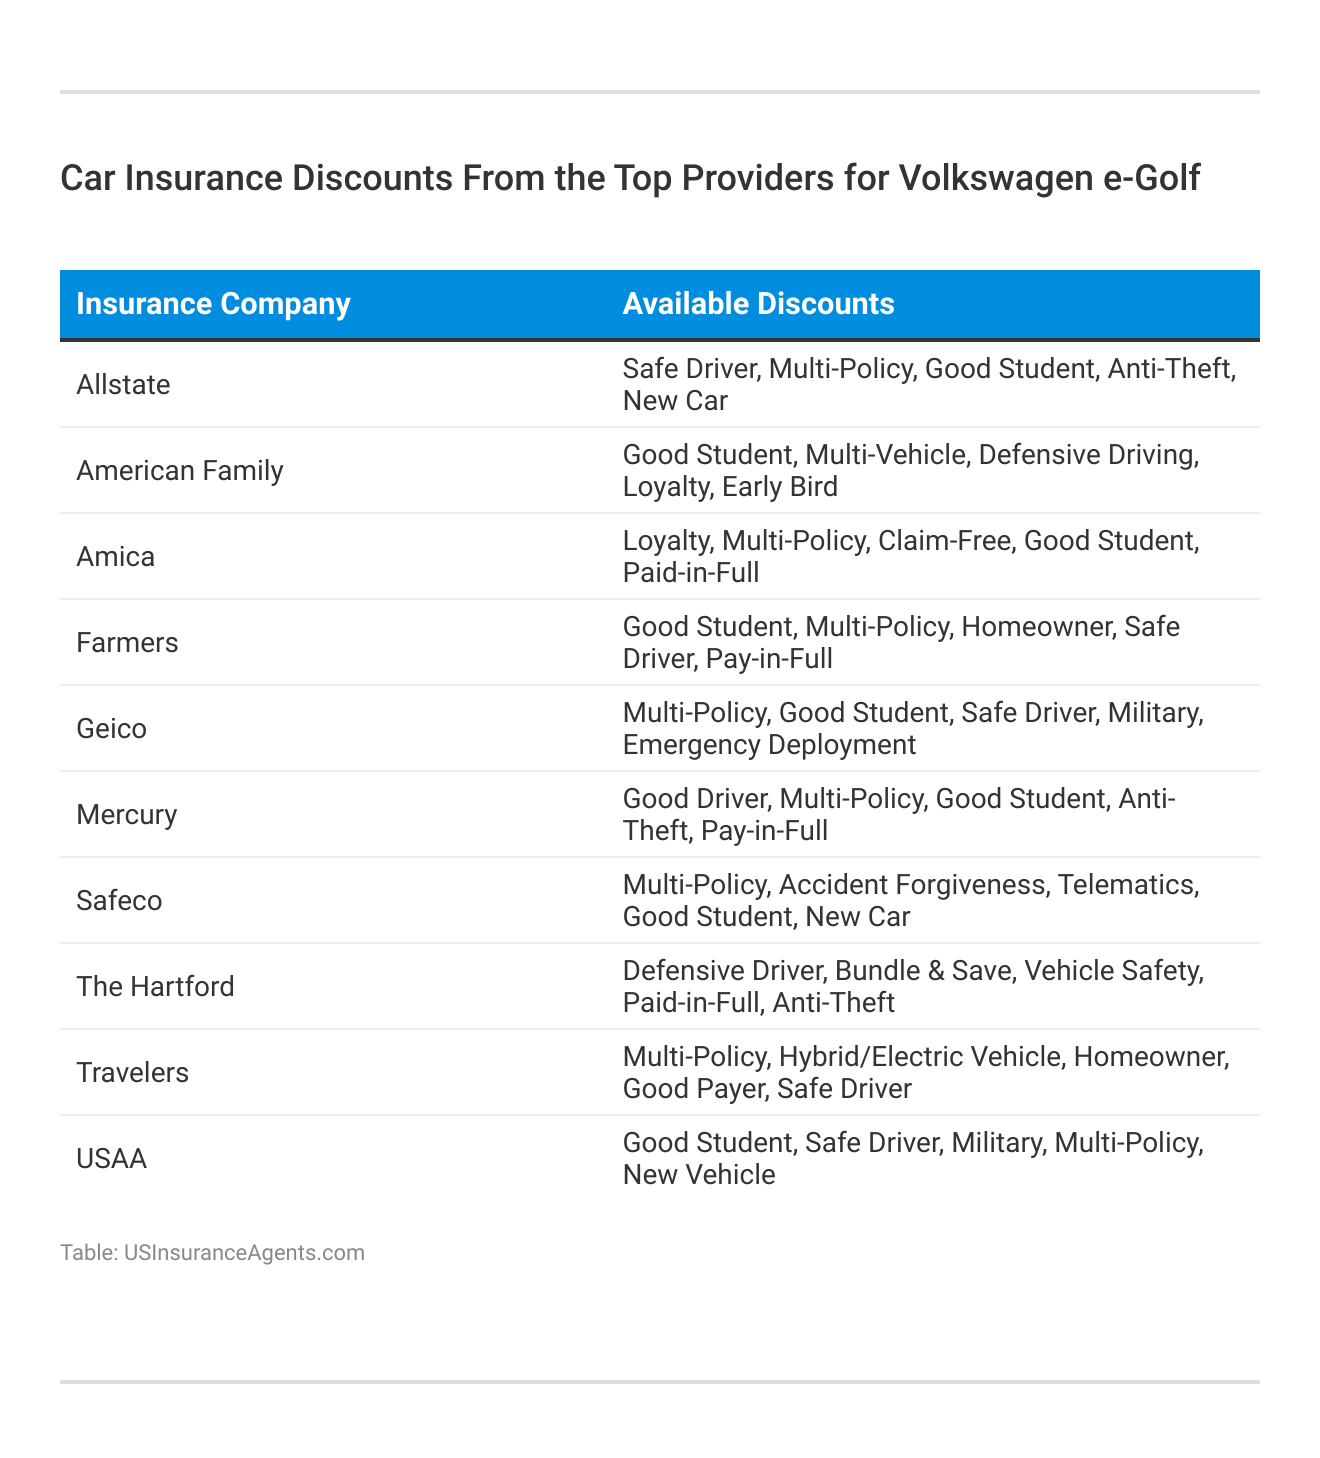 <h3>Car Insurance Discounts From the Top Providers for Volkswagen e-Golf</h3>